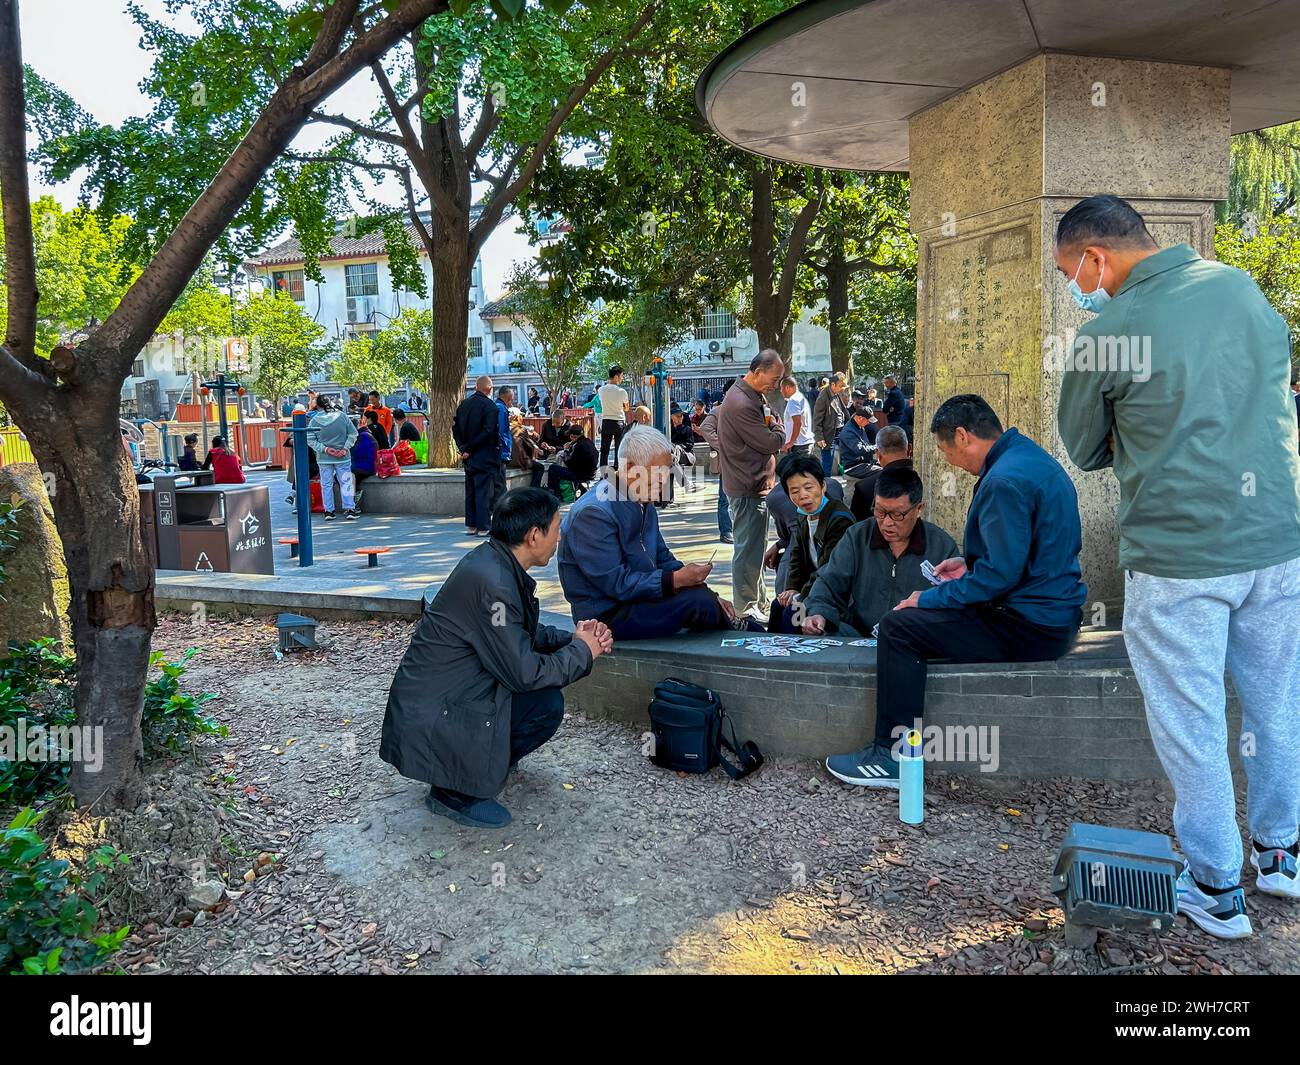 Suzhou, China, Chinese Tourists, Street Scenes, Large Crowd People, Men, Seniors sitting Playing Games on Town Square, senior social life, Retired, Stock Photo